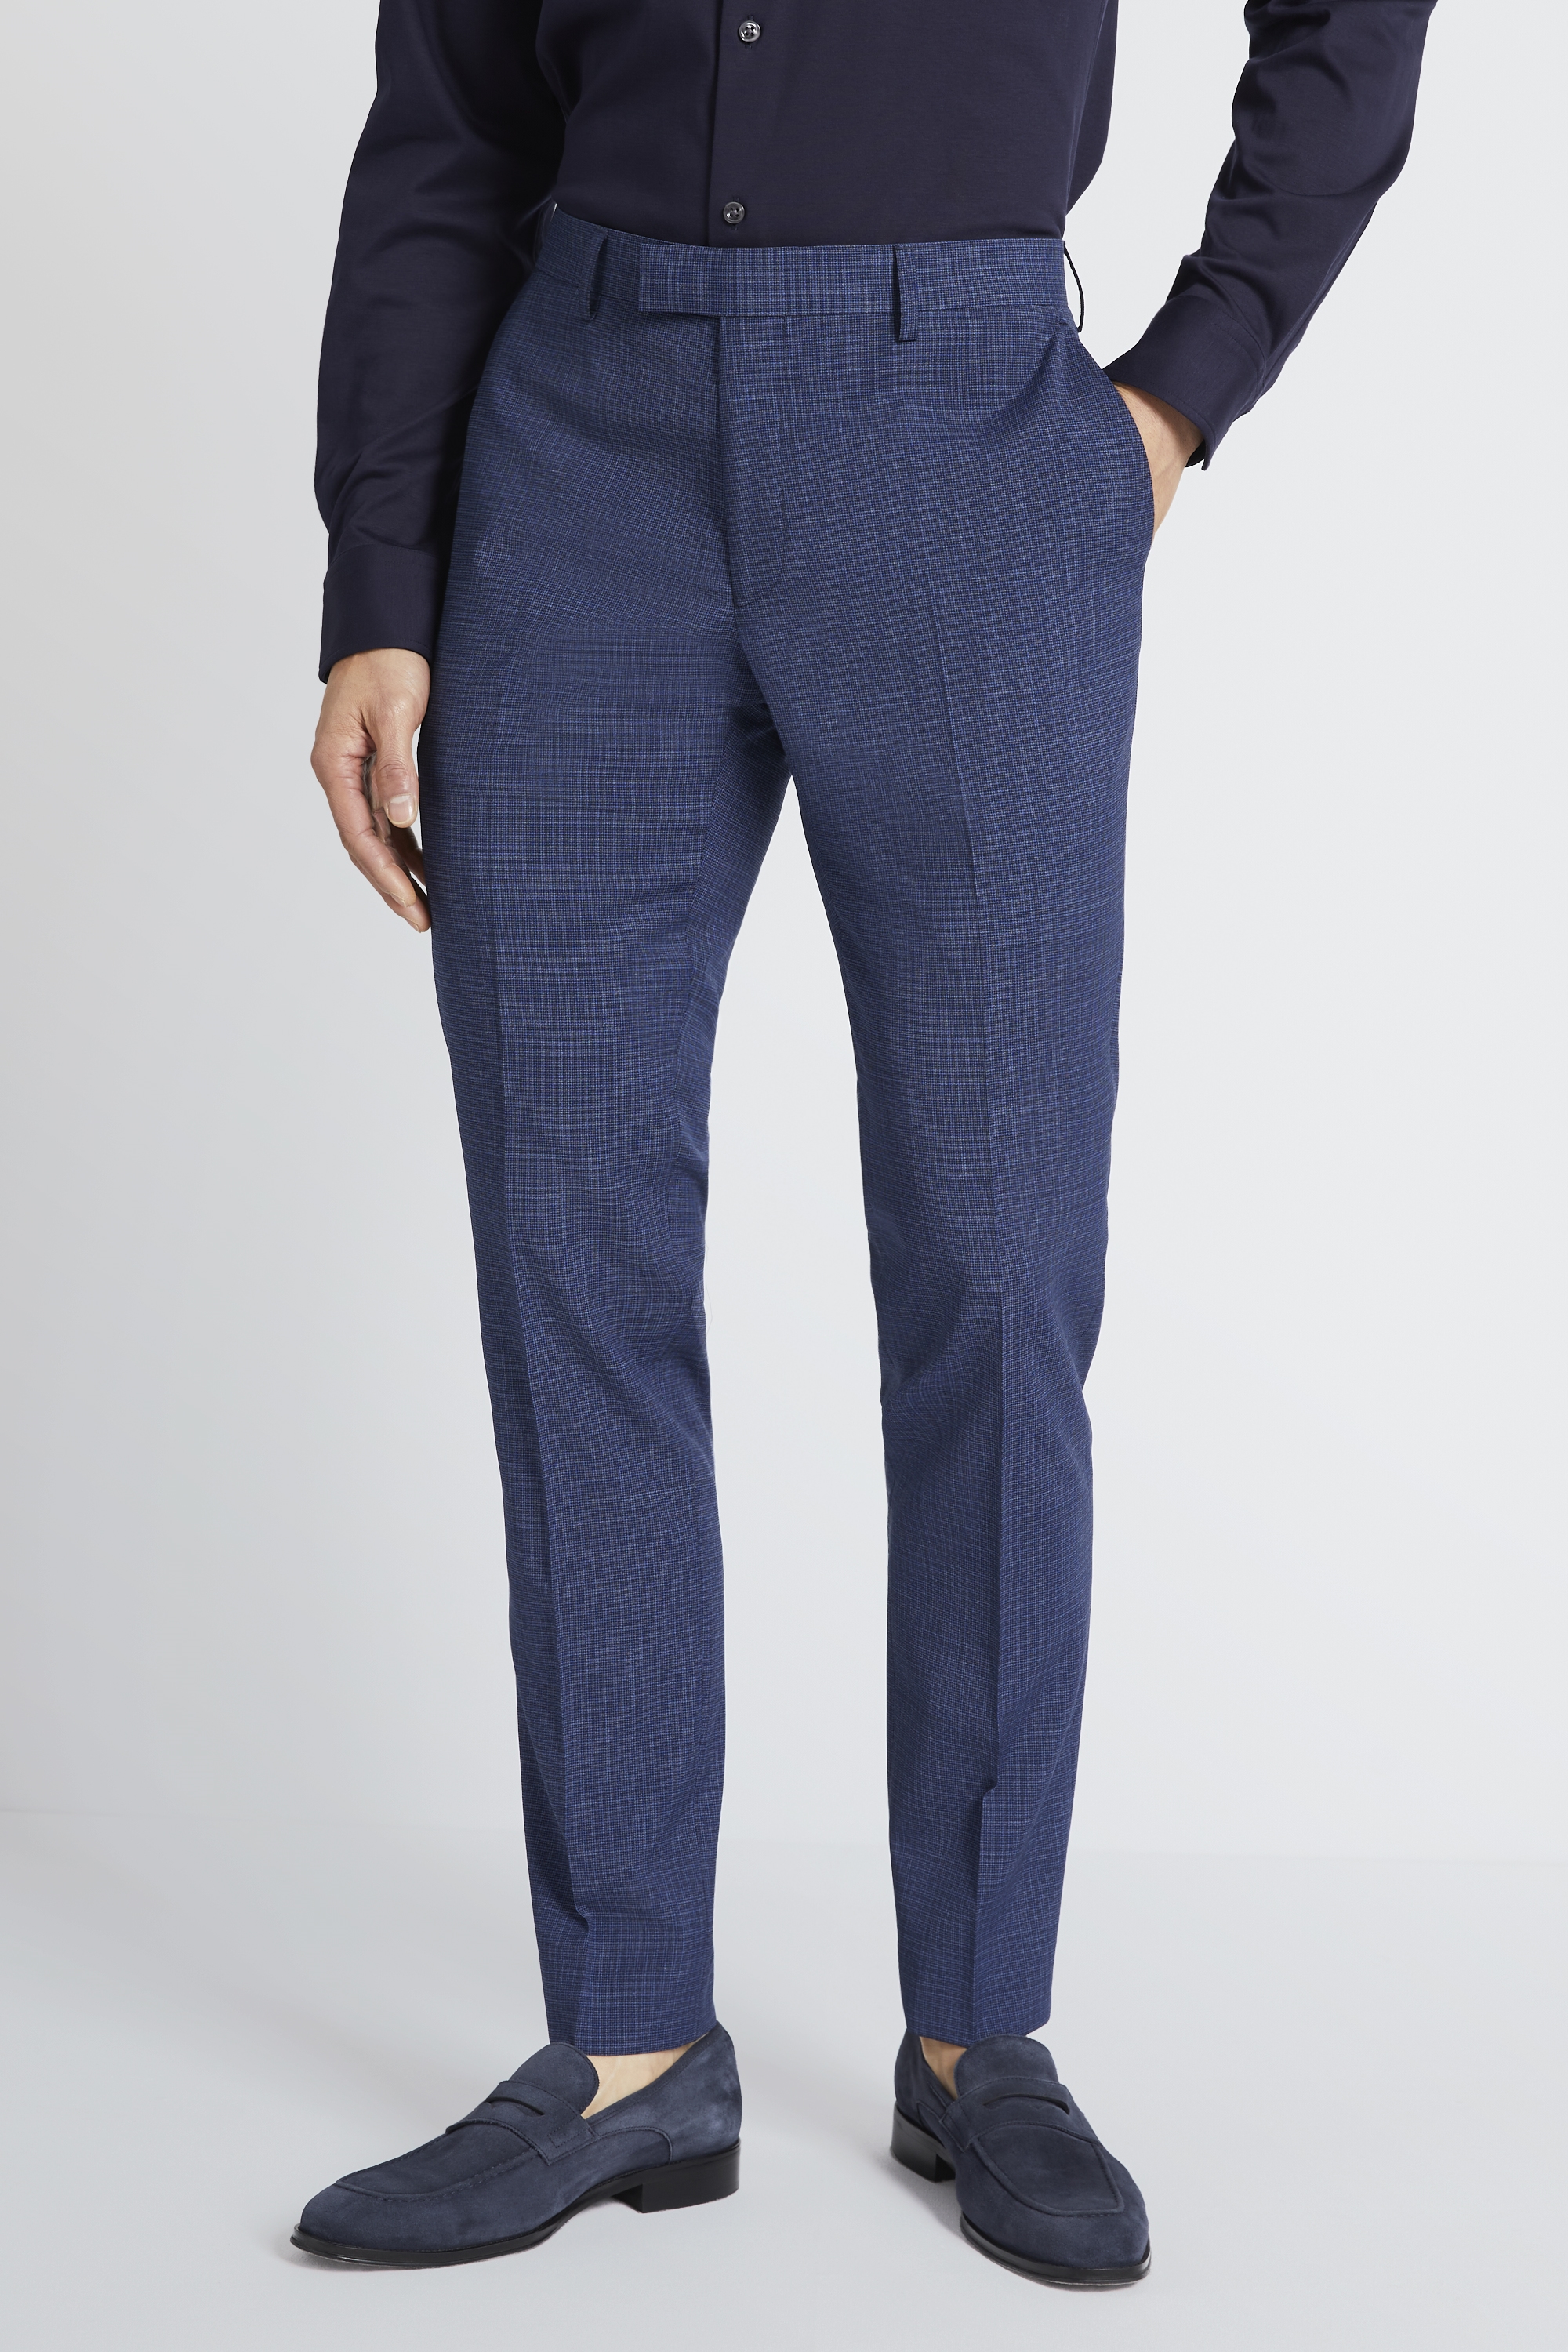 Slim Fit Bright Blue Micro Check Trousers | Buy Online at Moss